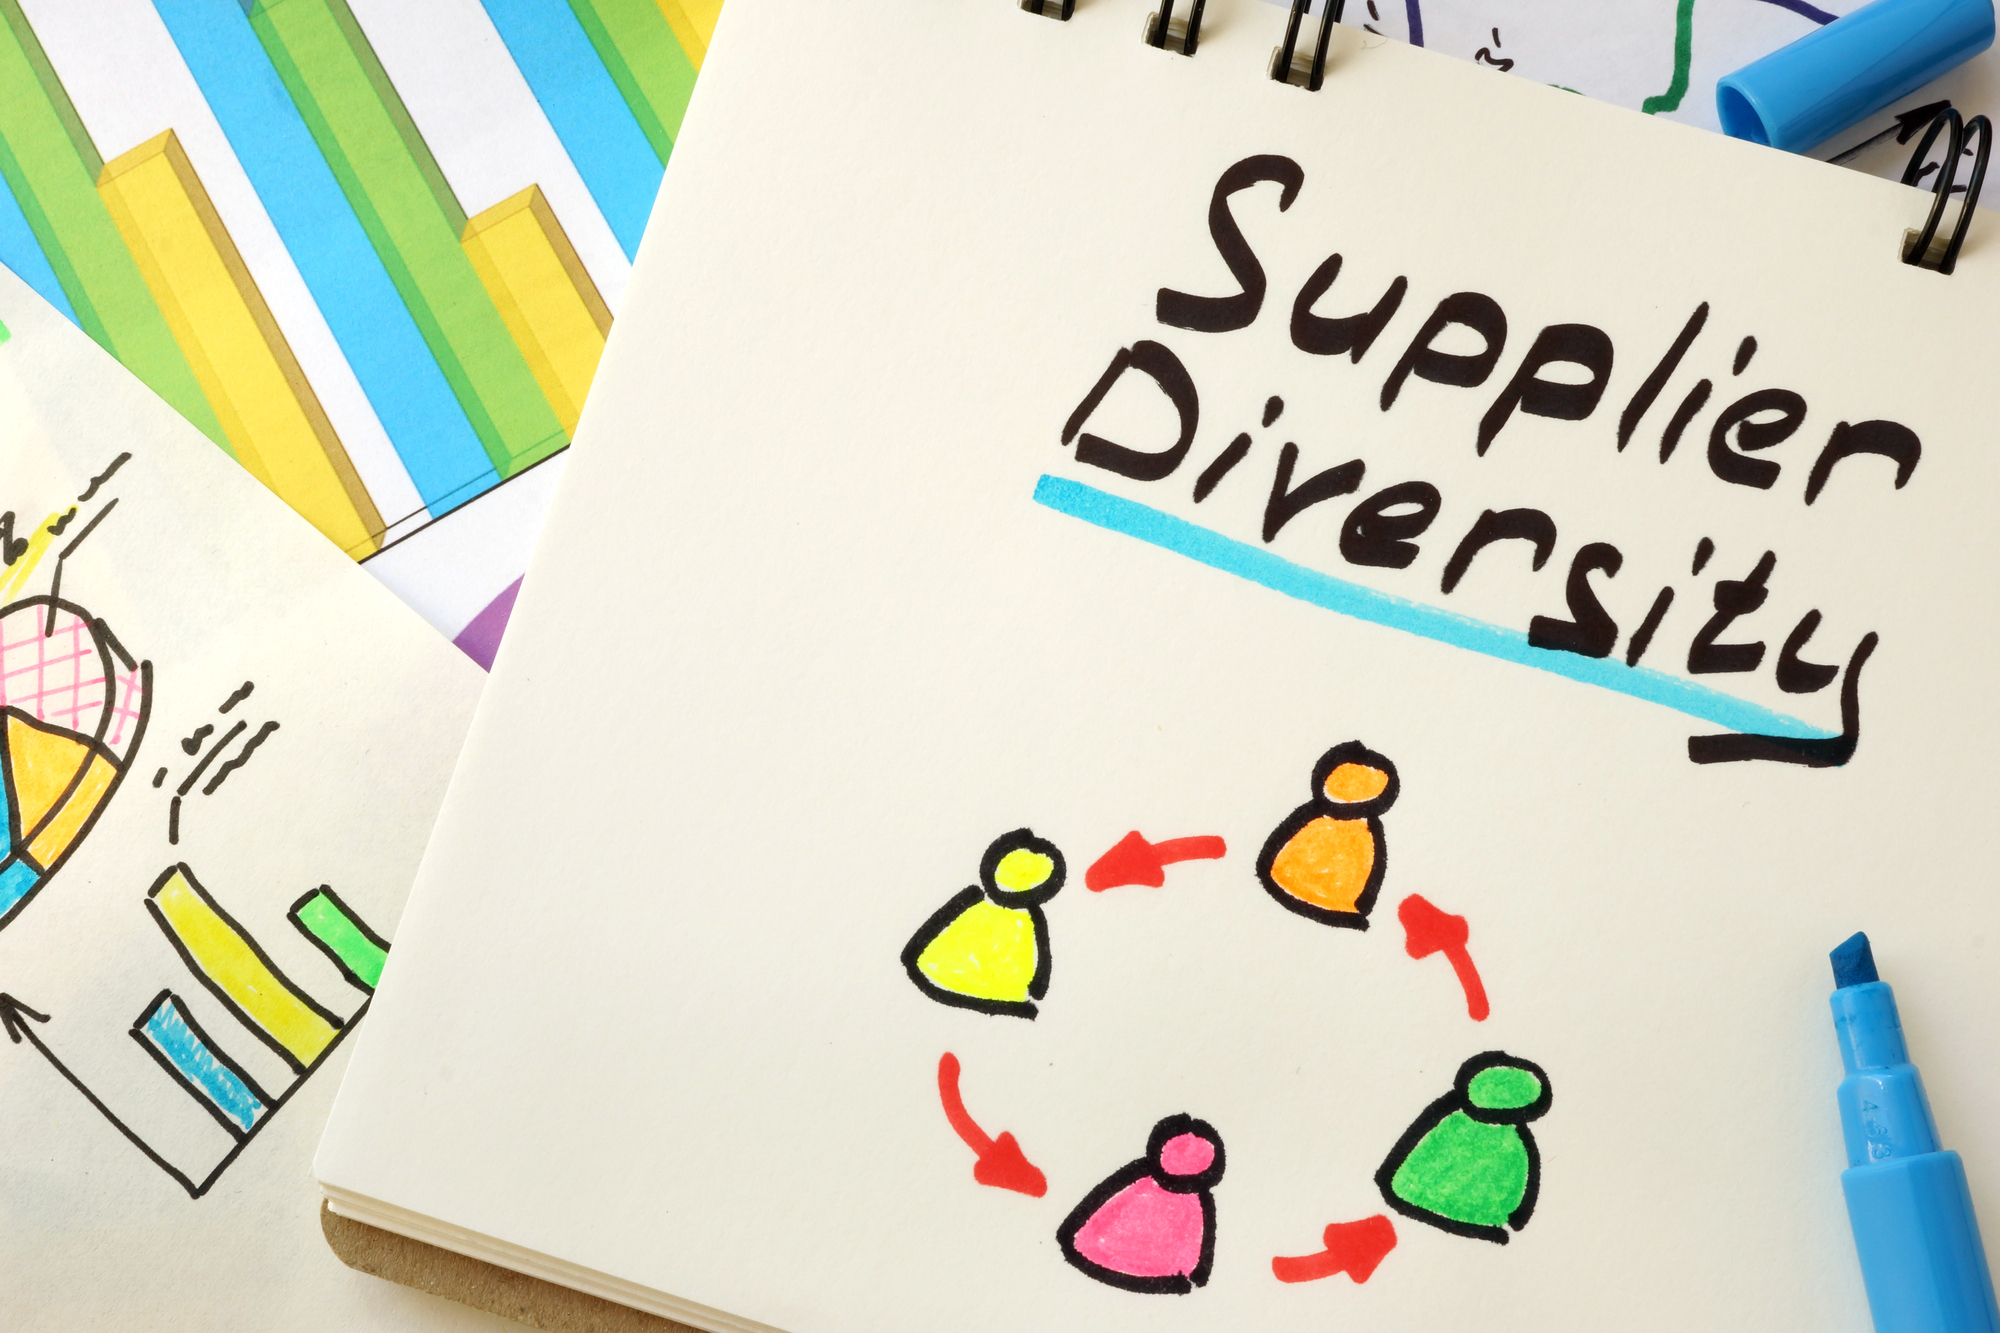 Supplier Diversity and Its Role in Business